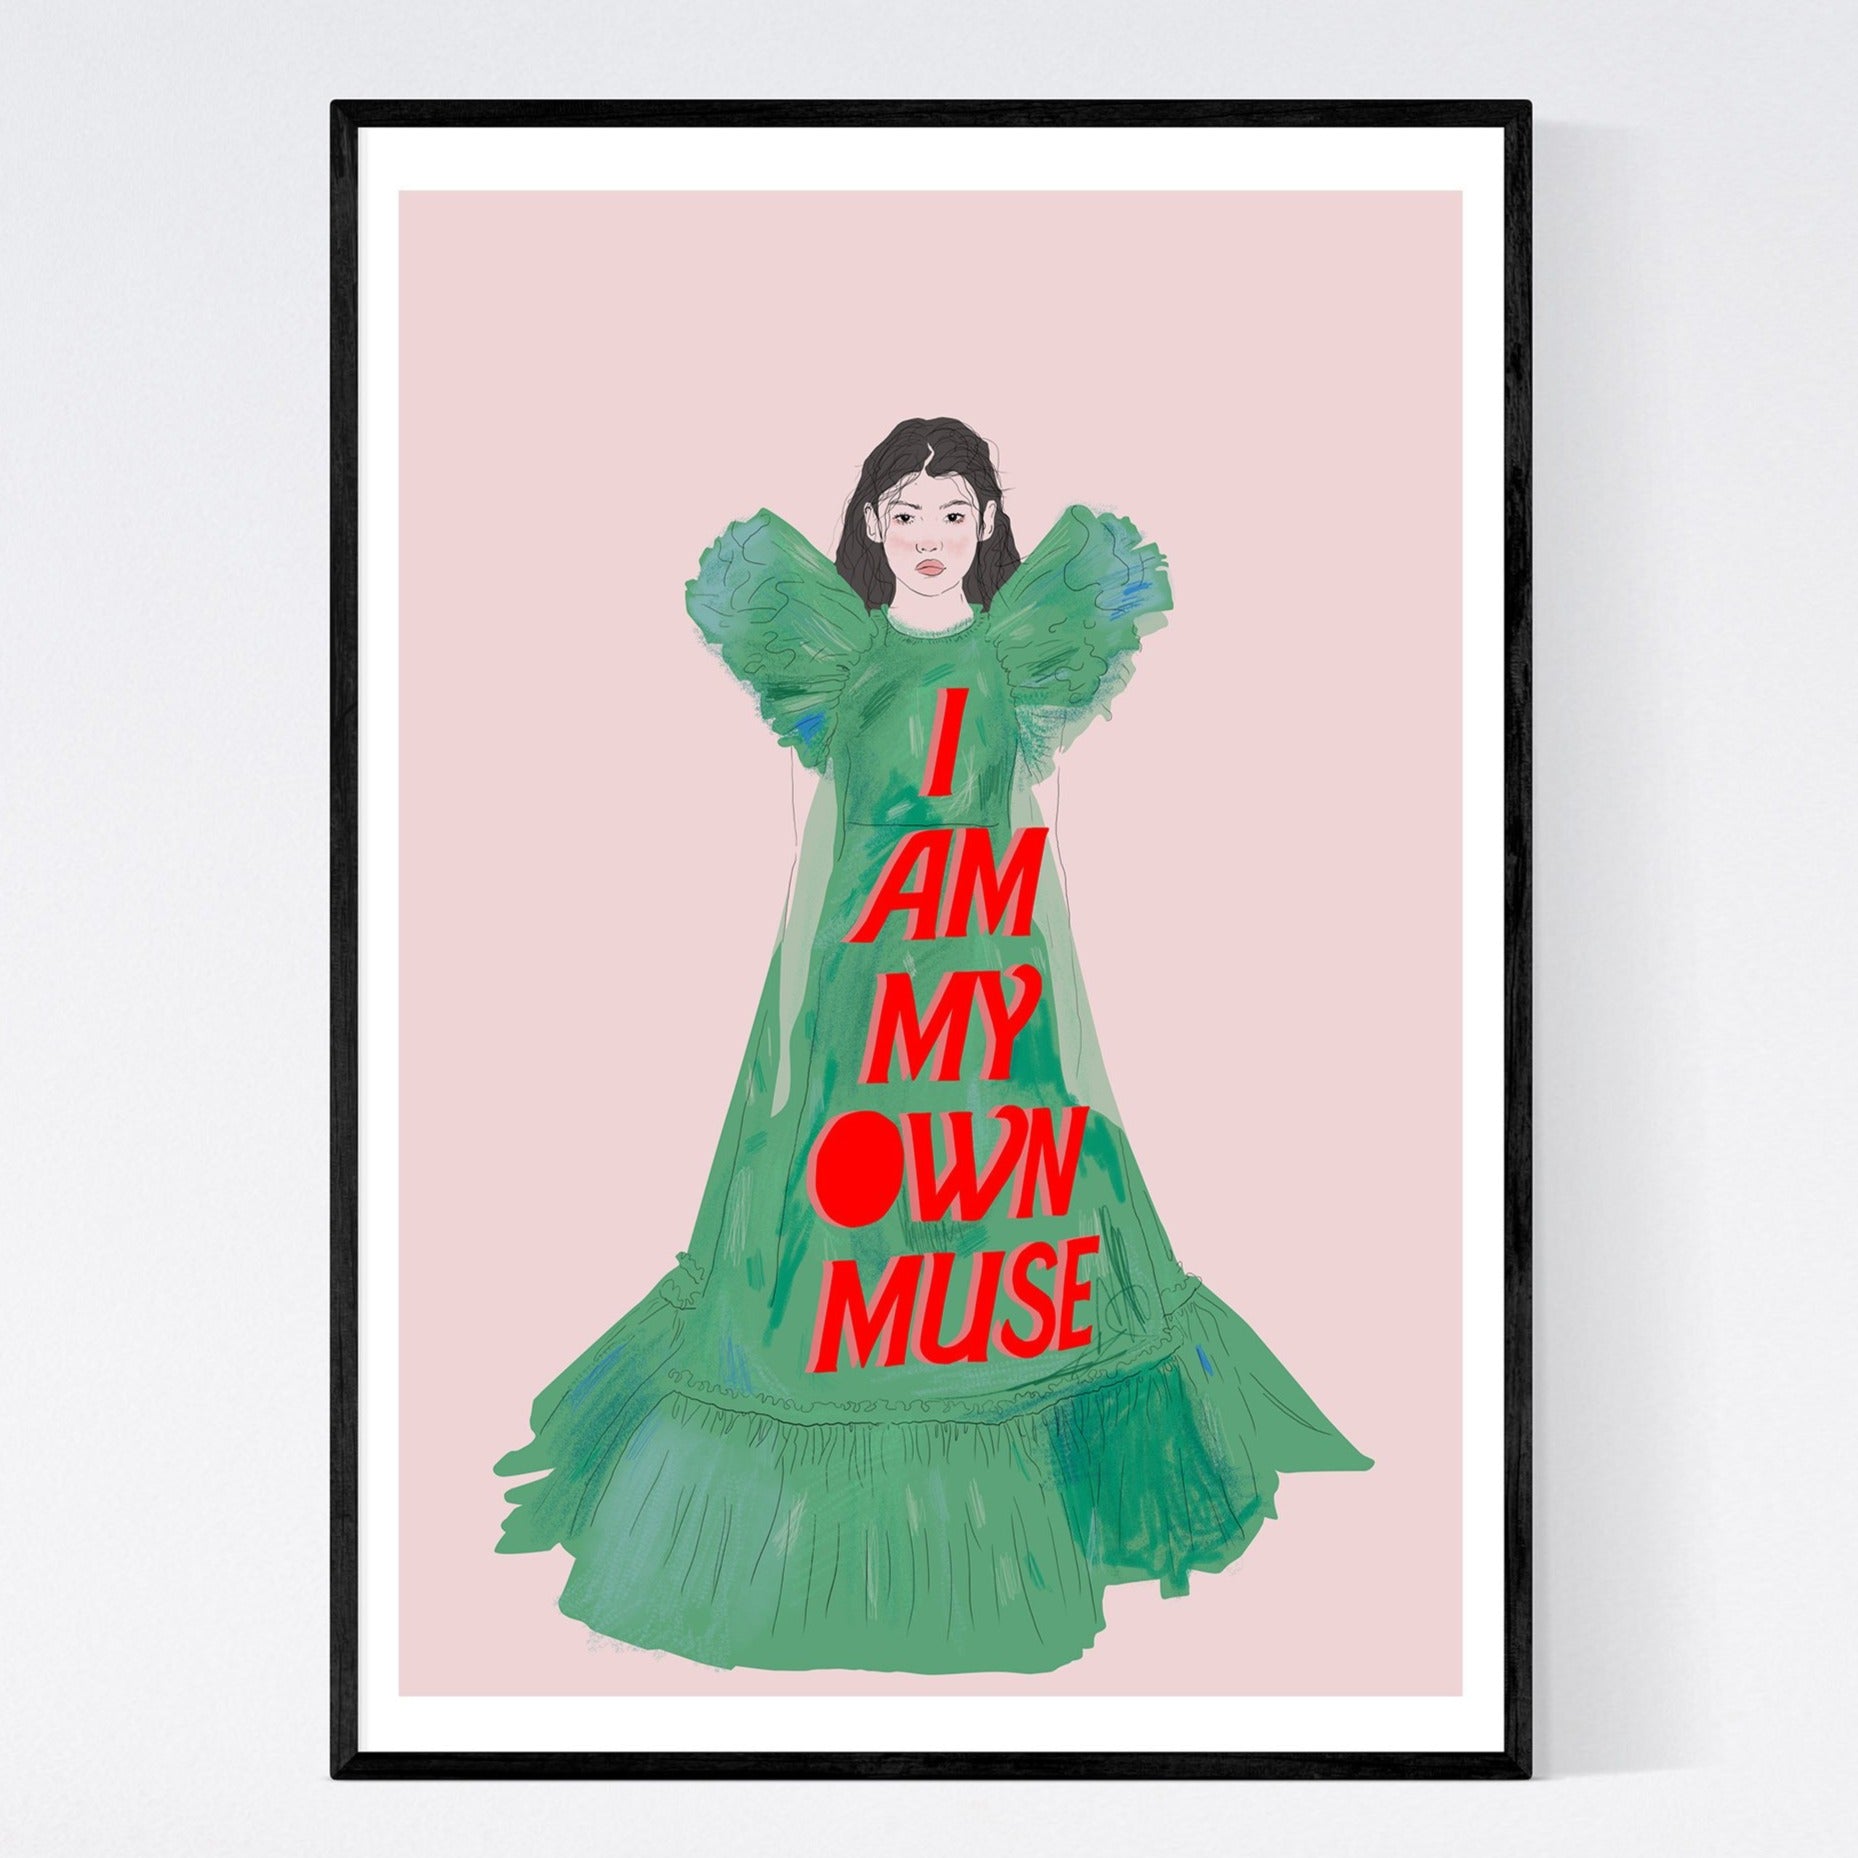 illustration print of a young woman wearing a full length green dress with the words i am my own muse on it. the background is a light dusky pink.